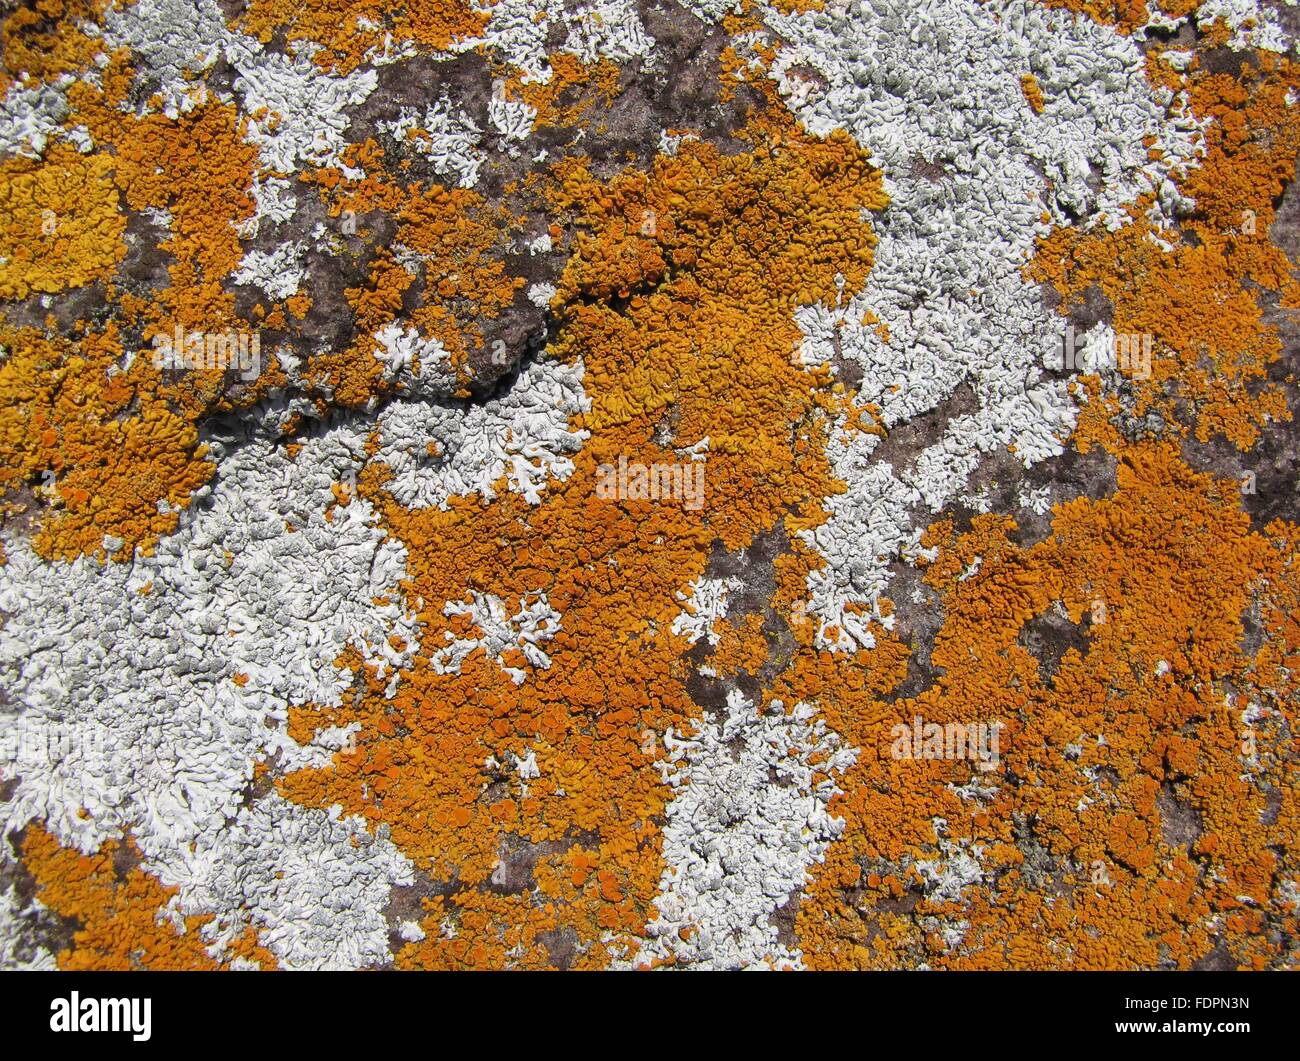 White Lichen High Resolution Stock Photography and Images - Alamy